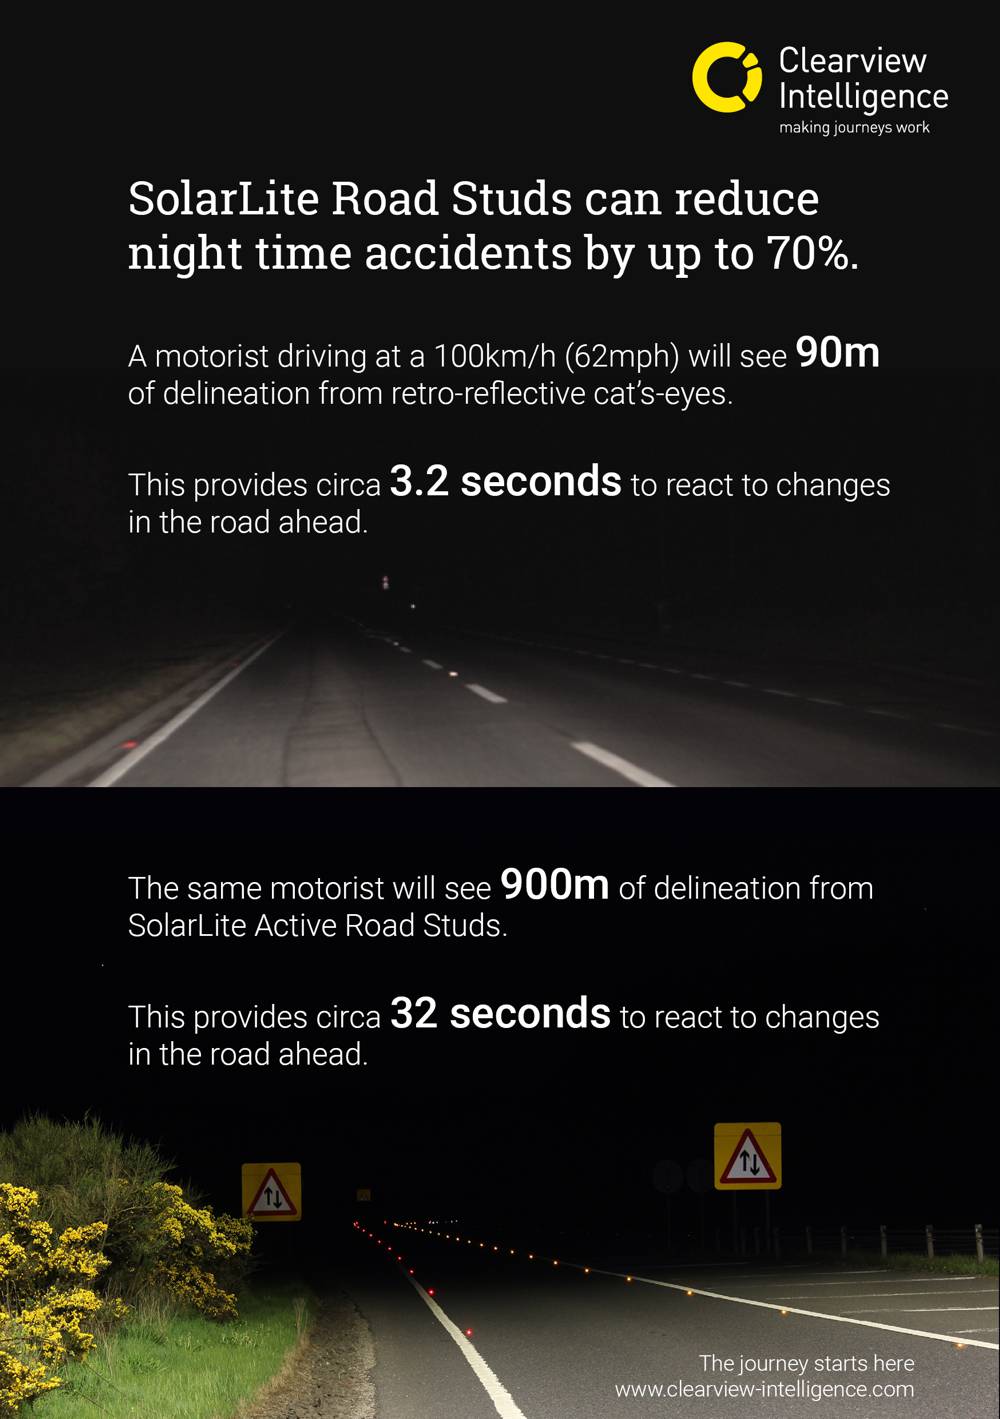 Driving in the dark: how targeting night-time road safety can make a big difference to the total number of fatal accidents 